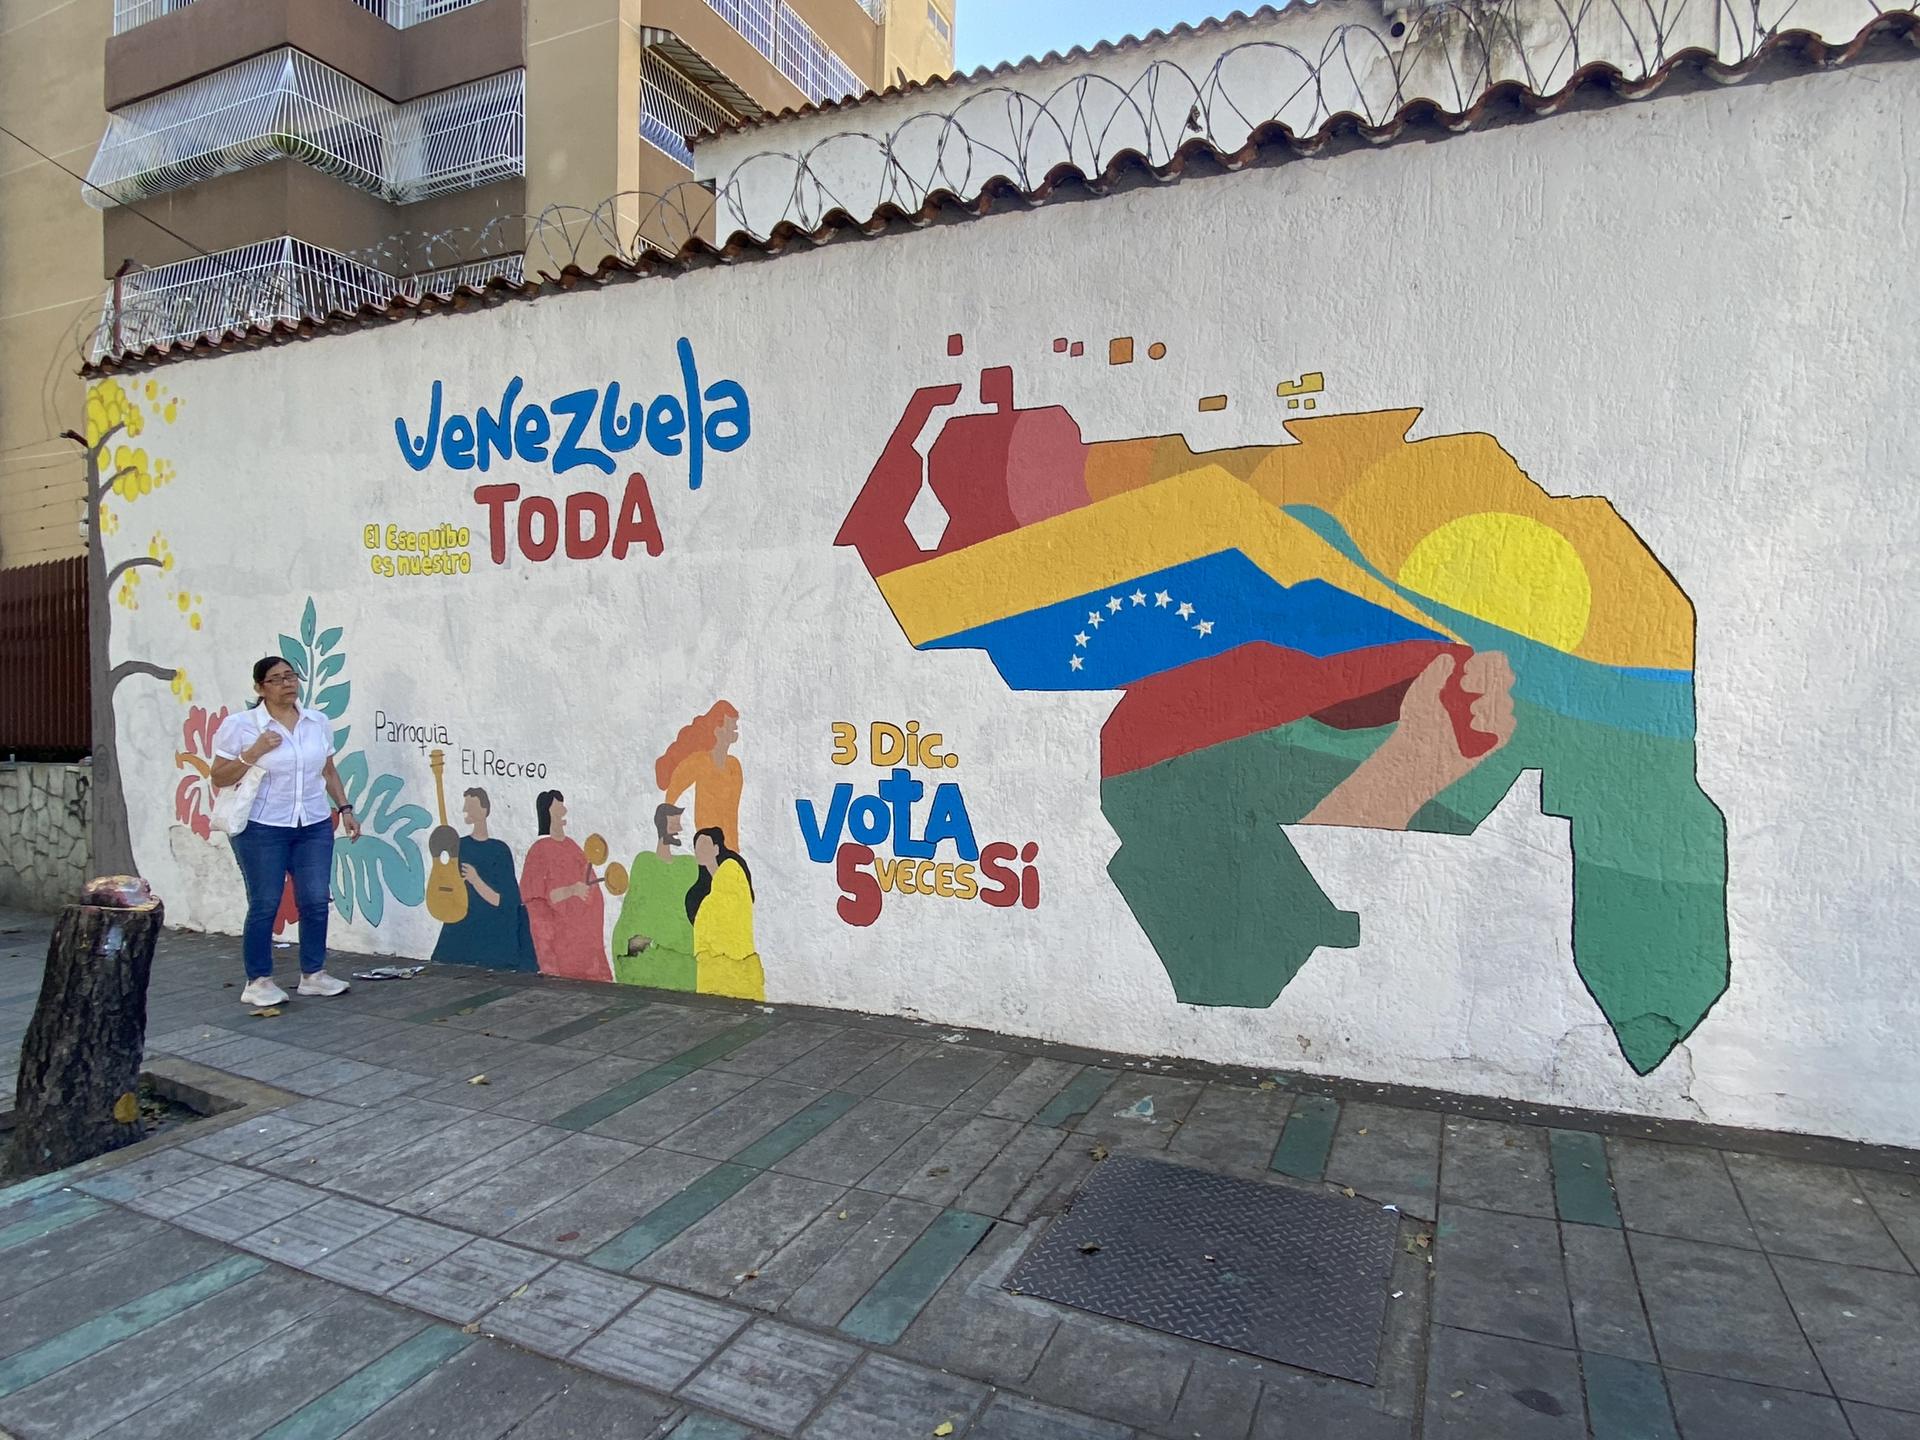  A colorful mural in Caracas depicts a map of Venezuela that includes the disputed Essequibo region. It's the long strip of land to the right of the rising sun. 